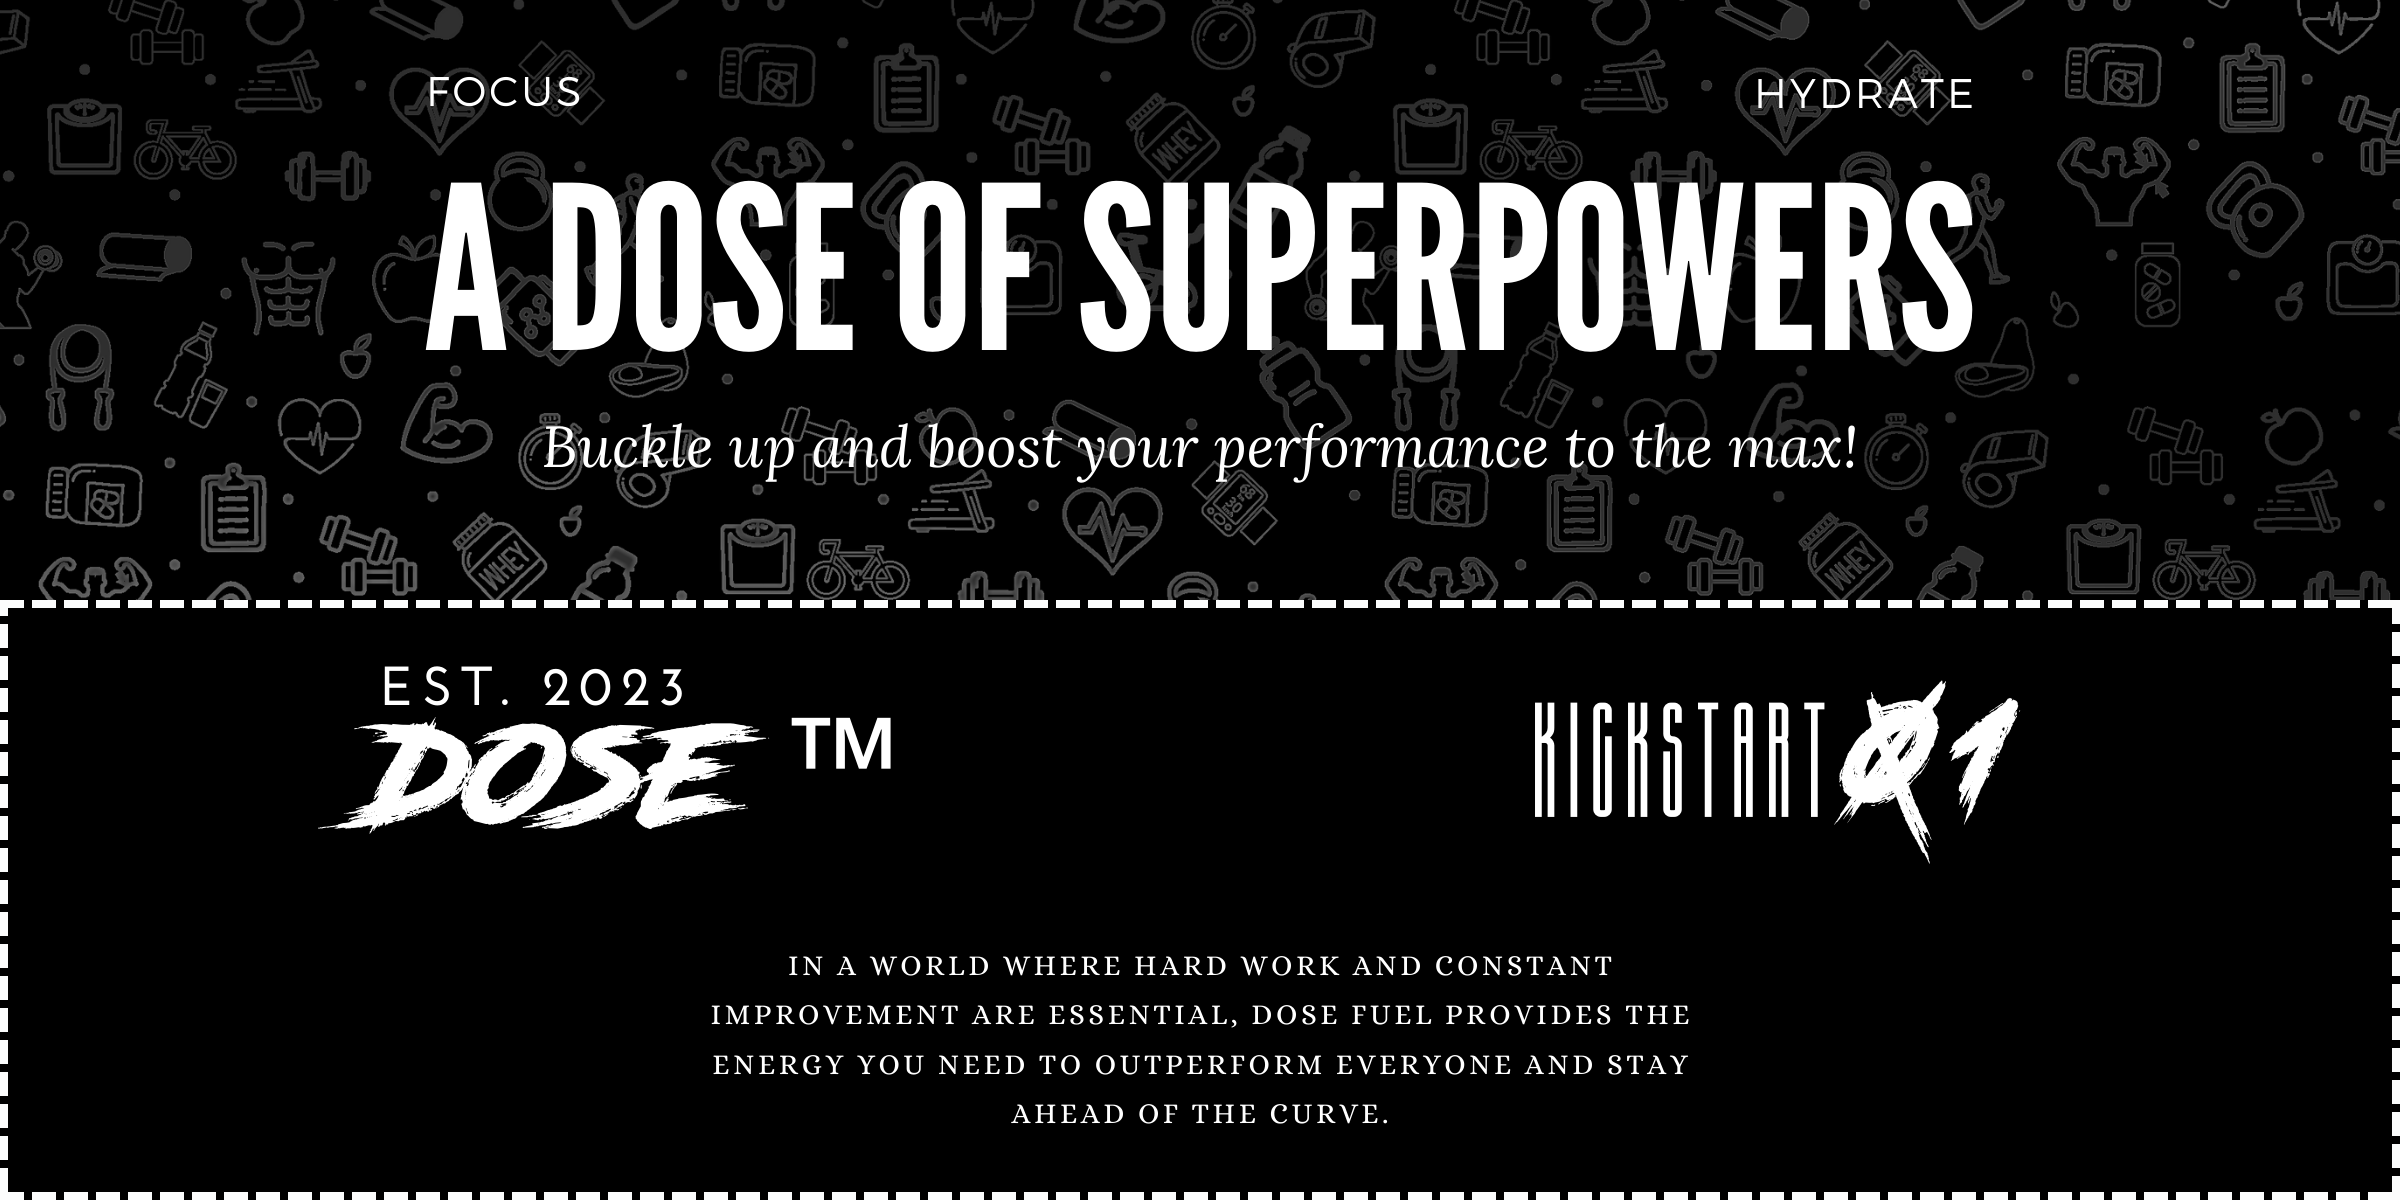 Dose Fuel Supplement Ad - A Dose of Superpowers, Boost Your Performance, Focus, Hydrate, Kickstart 81, Established 2023